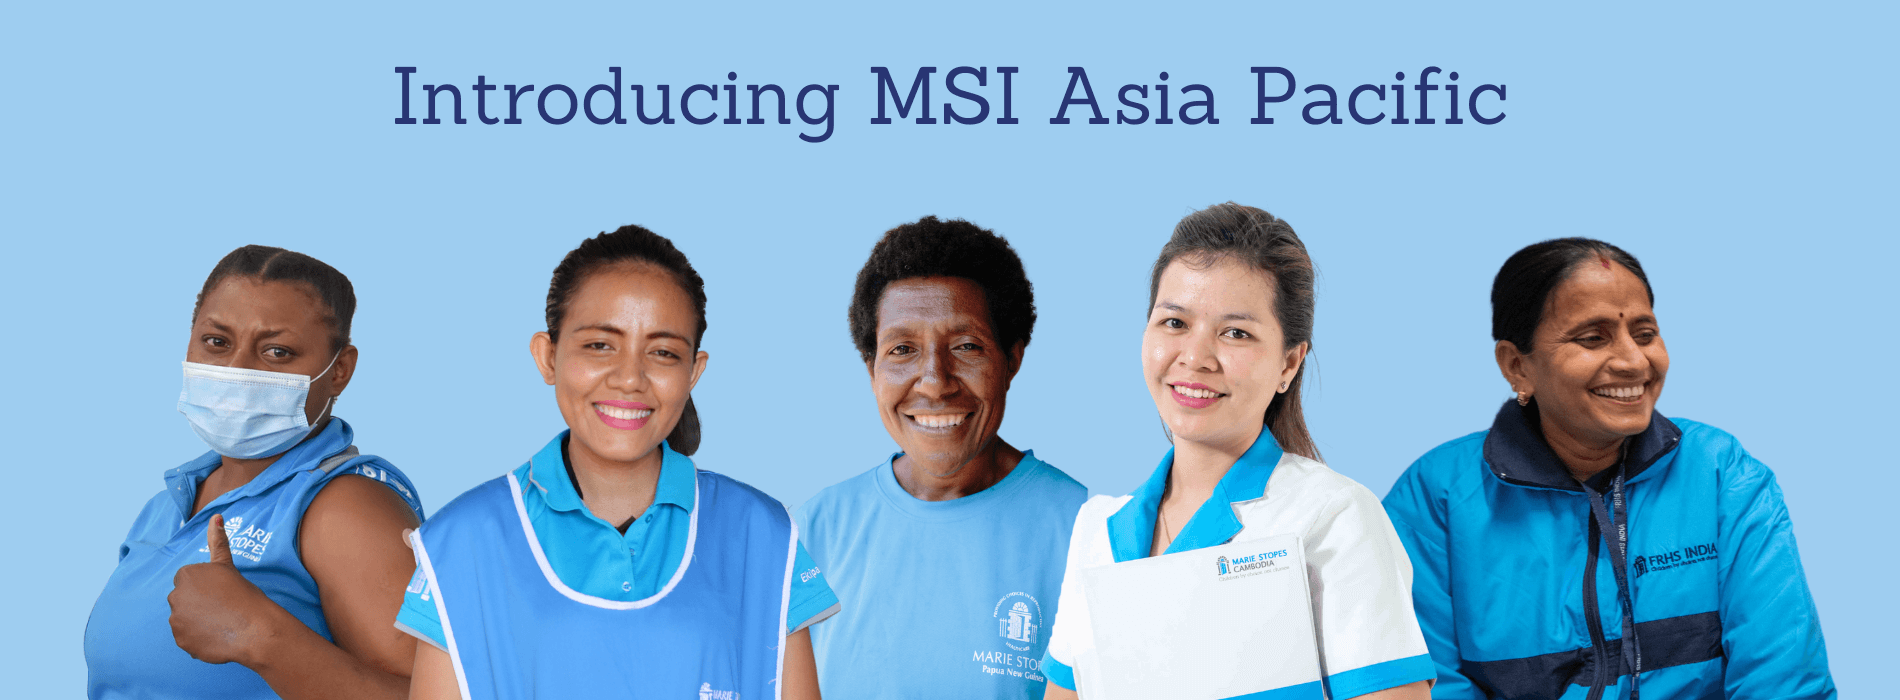 Introducing MSI Asia Pacific